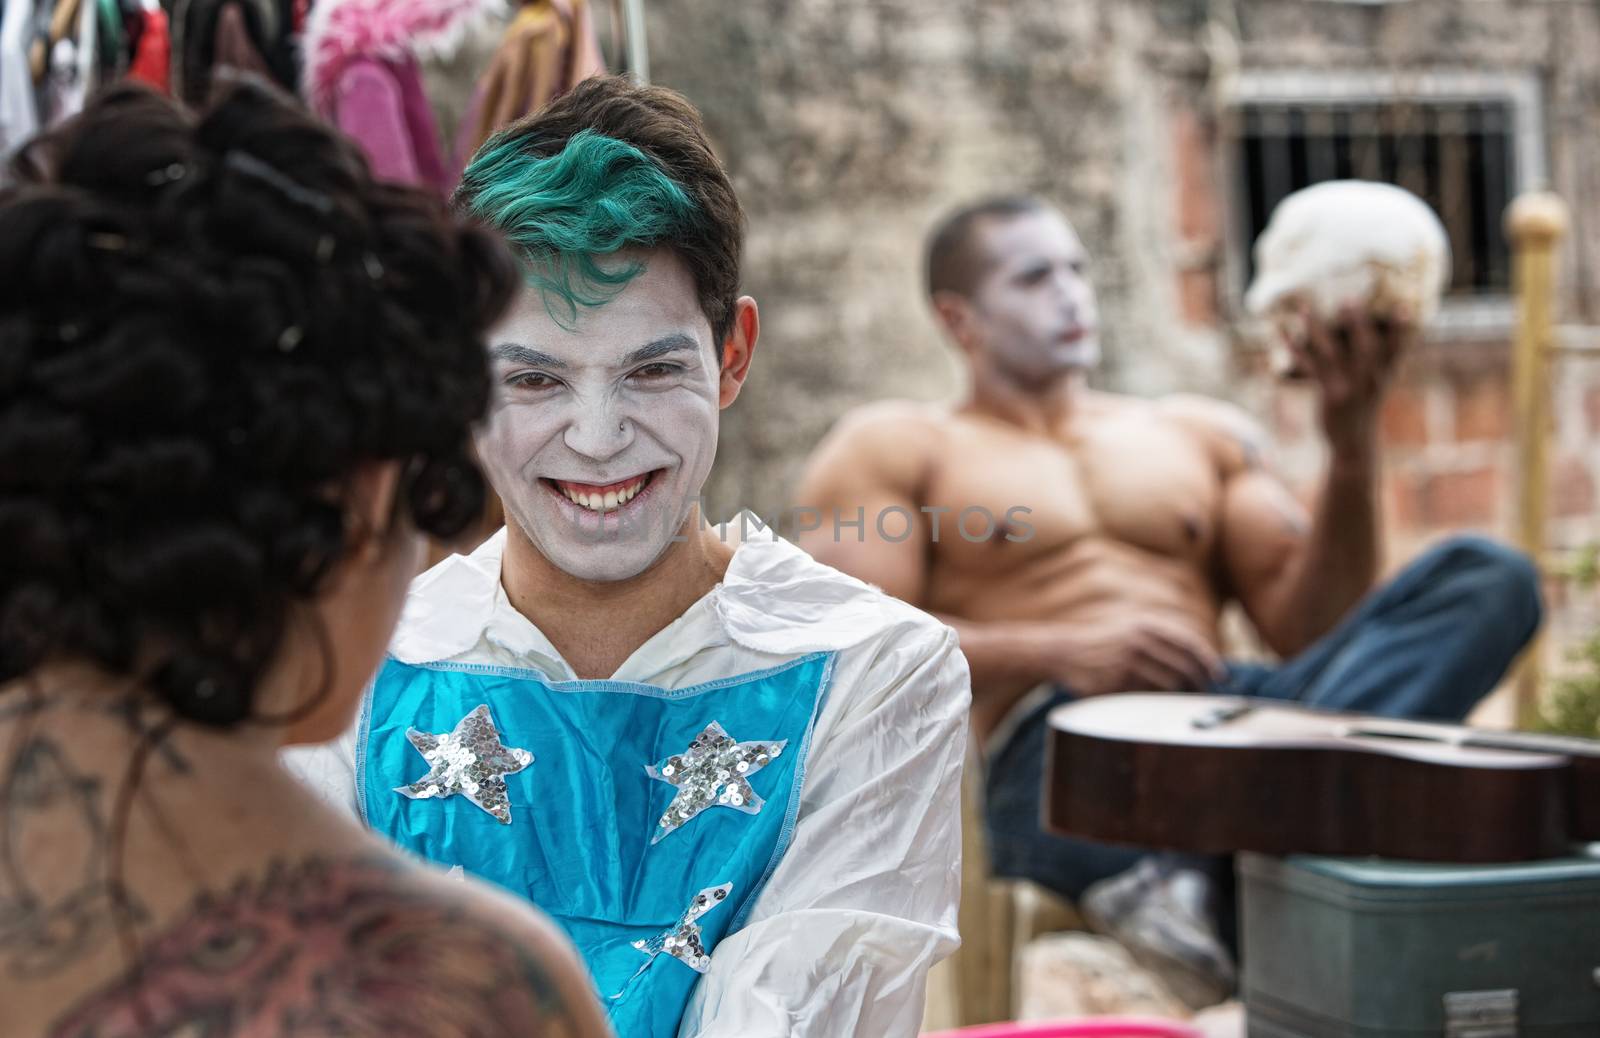 Giggling male cirque clown laughing with friend backstage